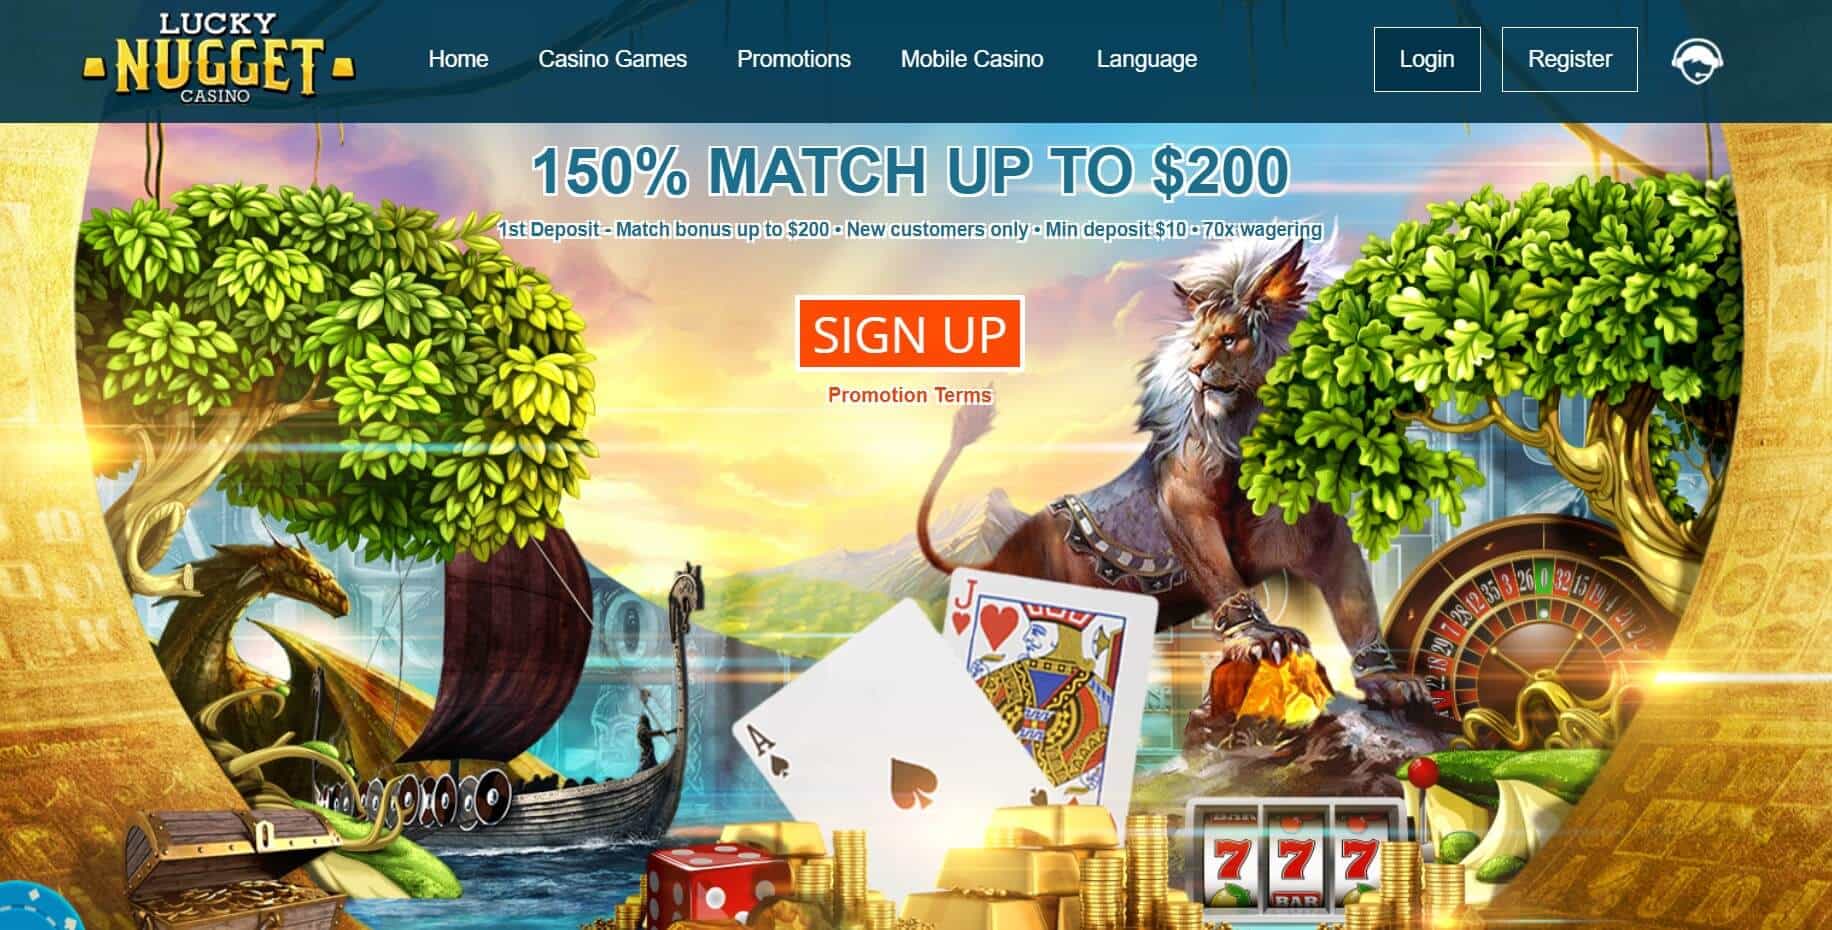 luckynugget casino homepage